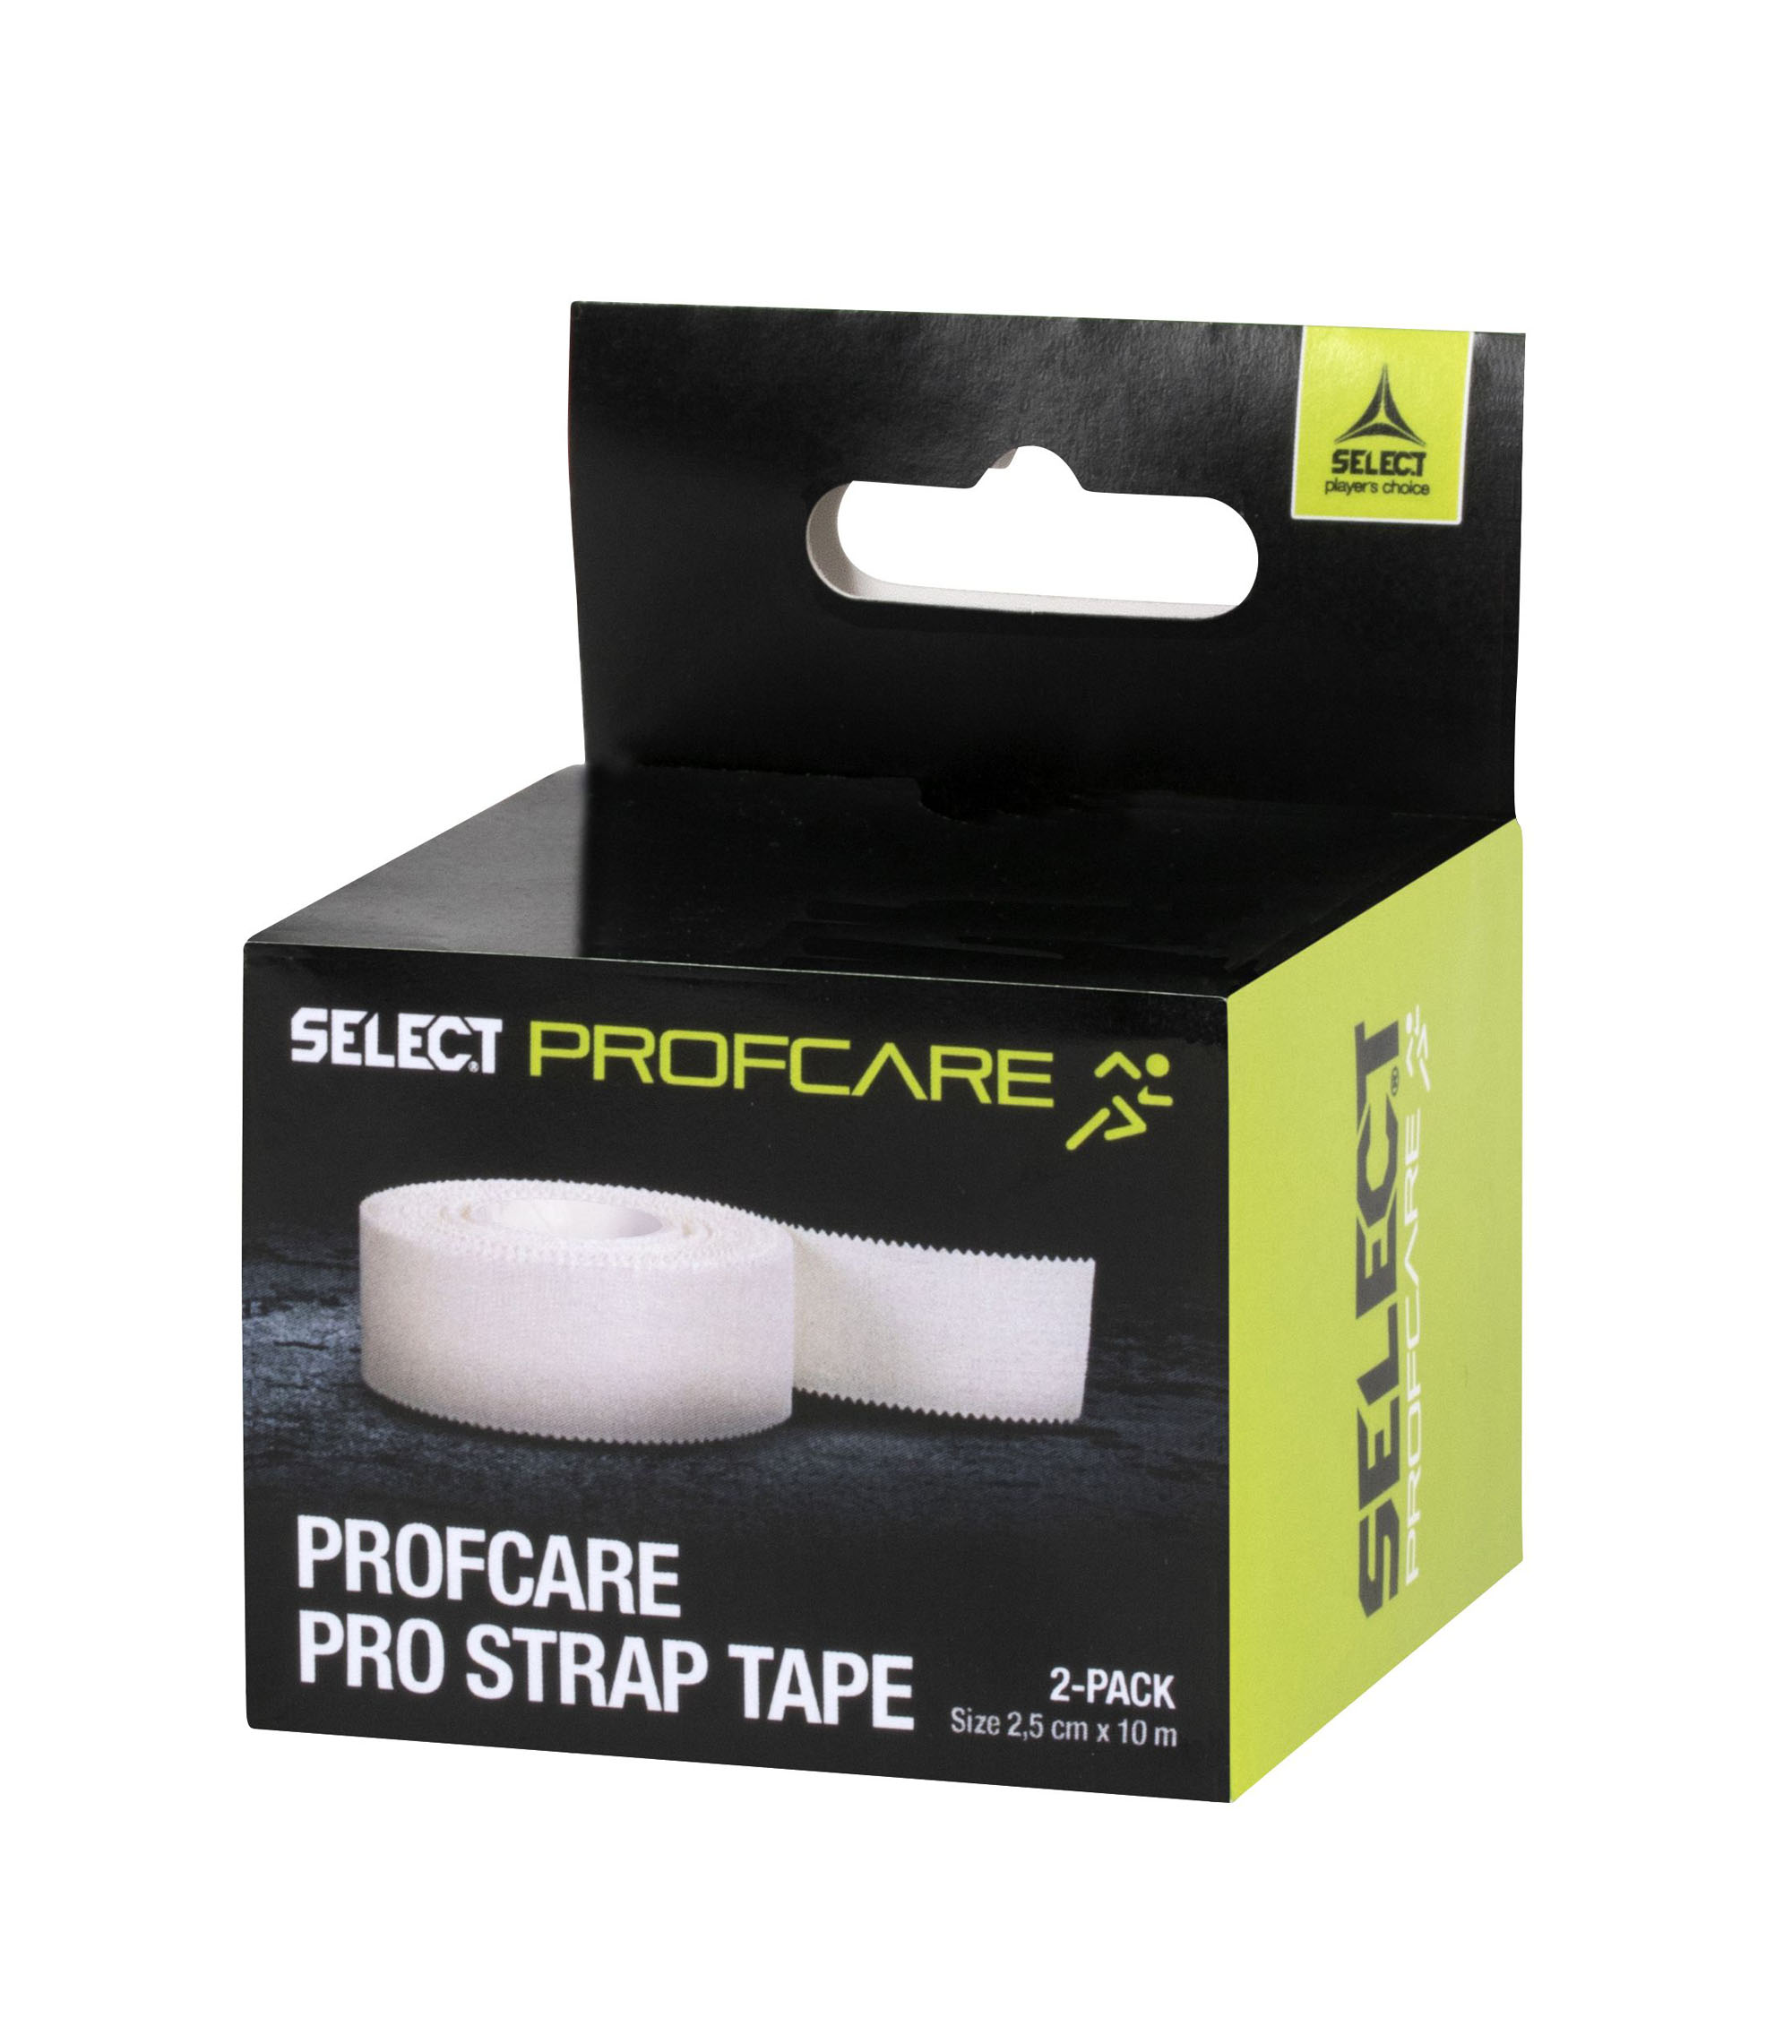 L720105-100_select_profcare_bande_adhesive_pro_strap_blanc_sgequipement